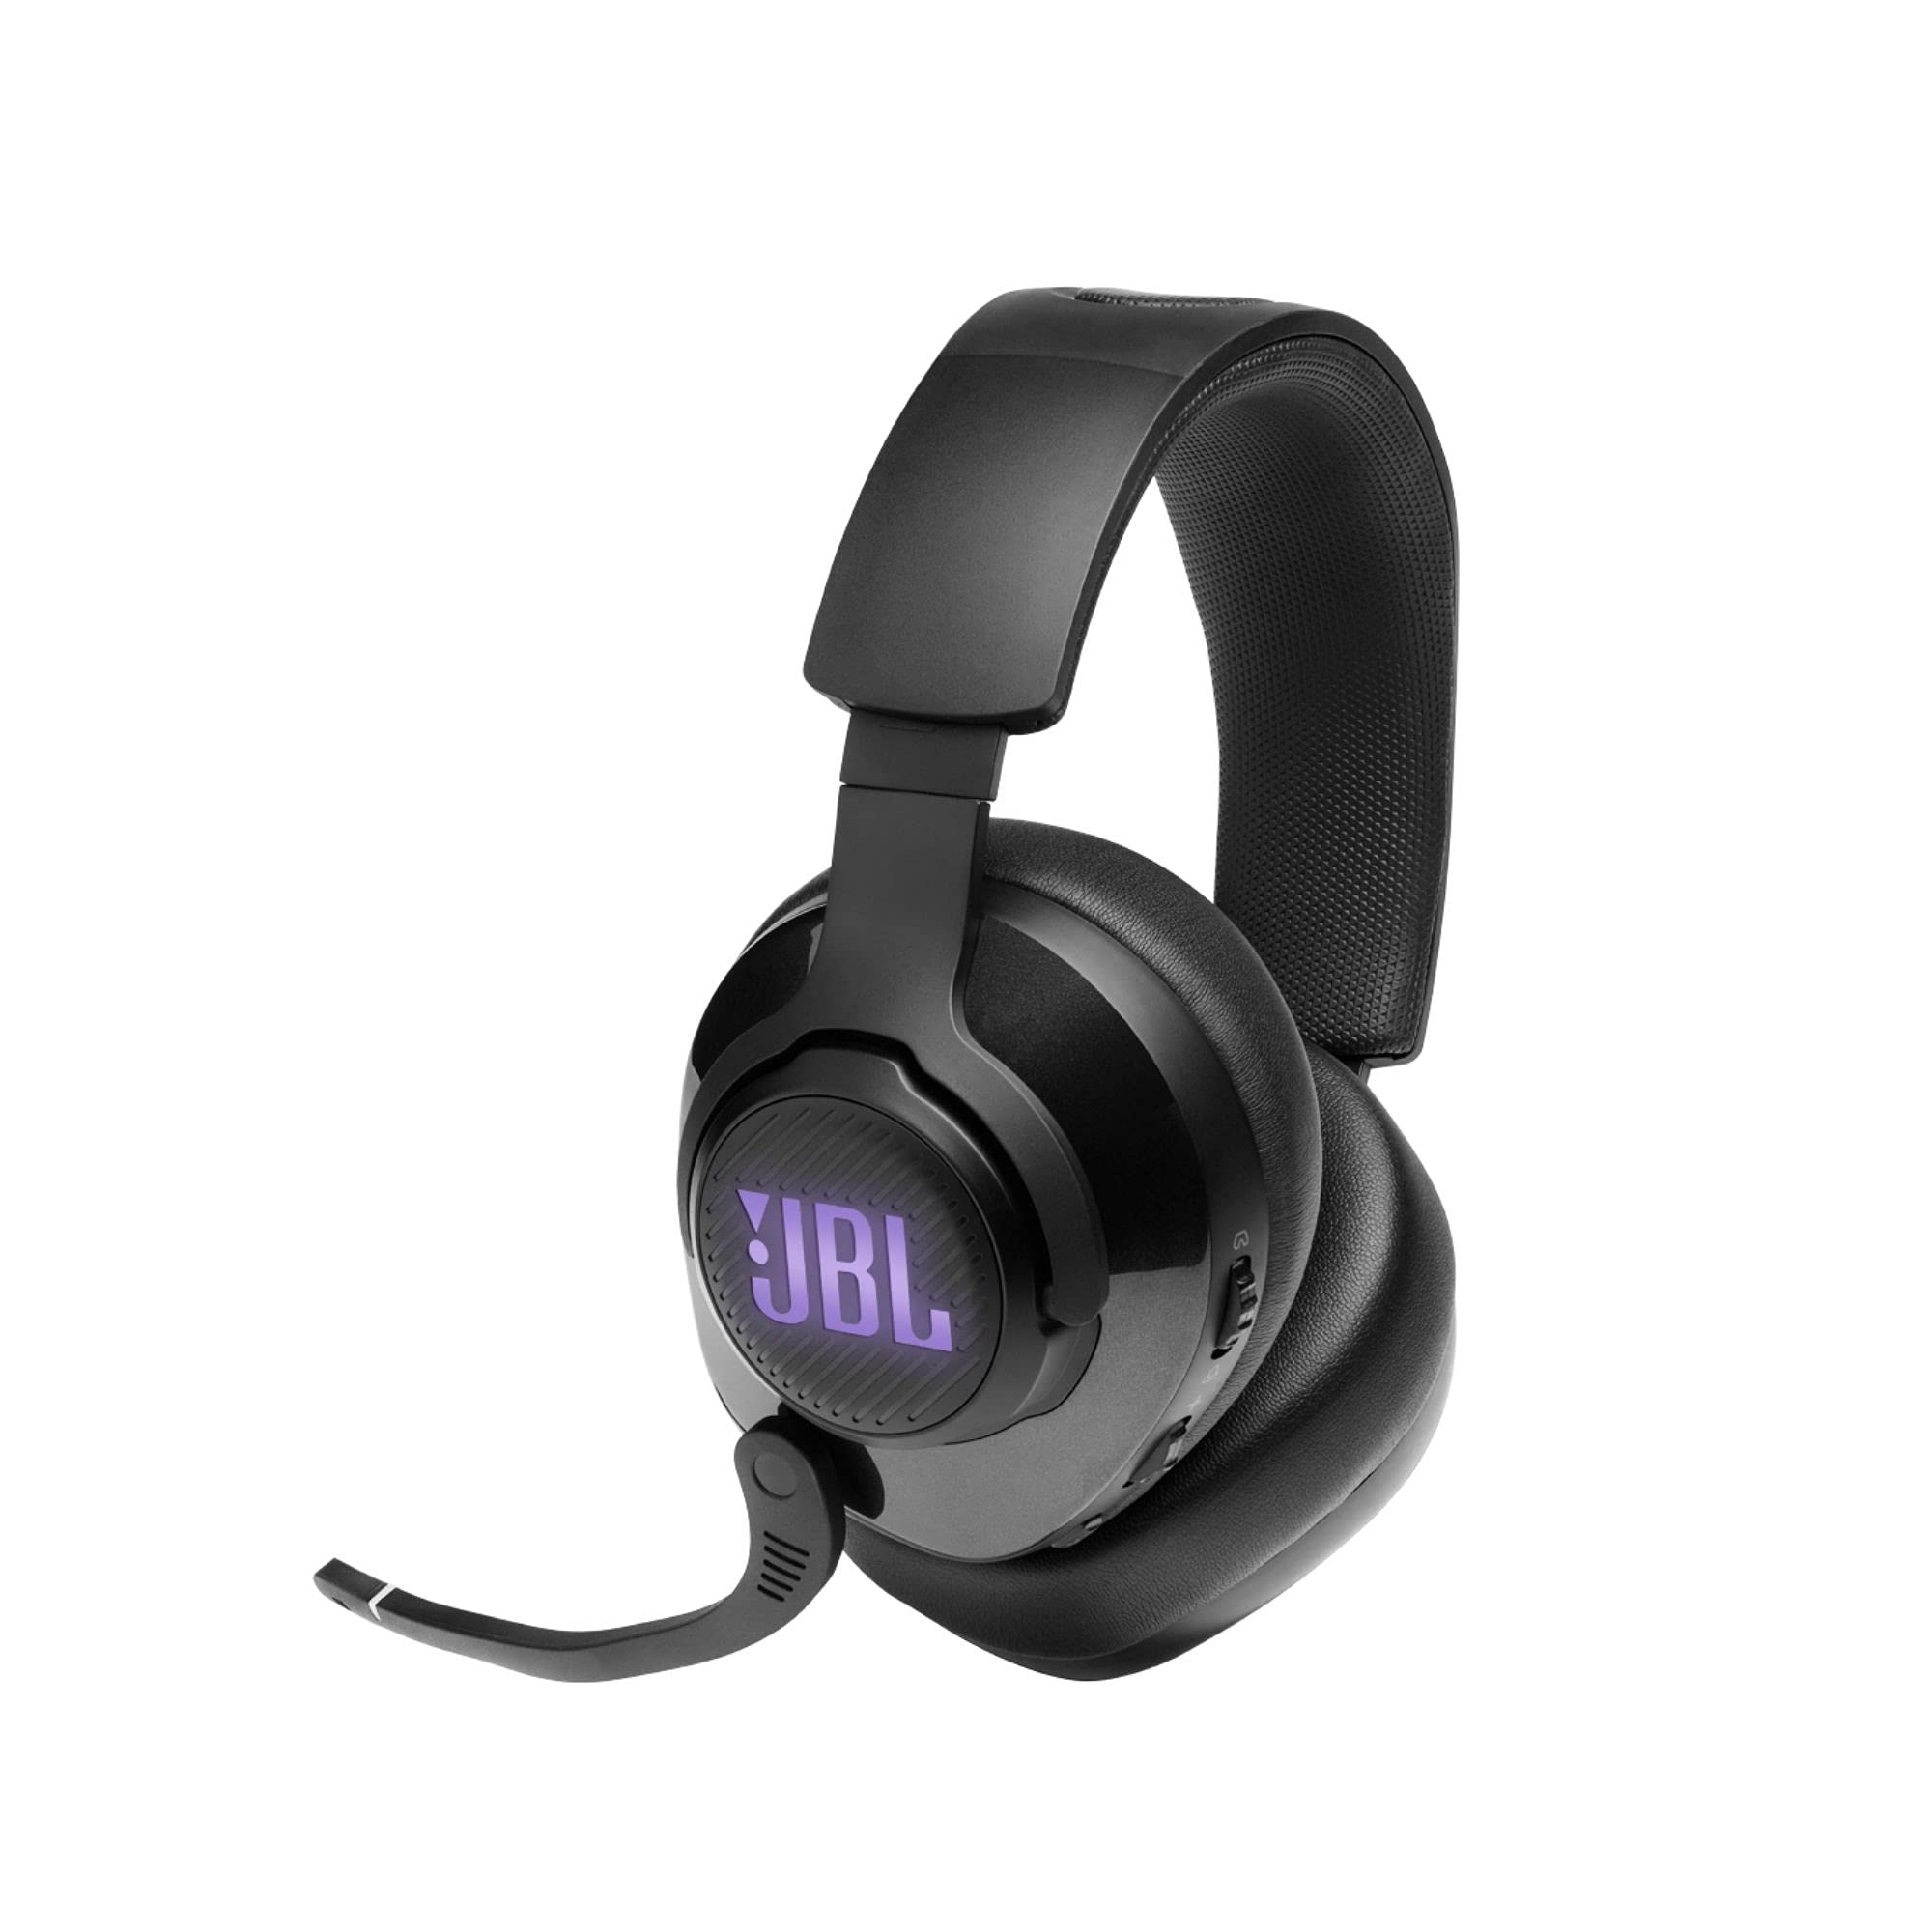 JBL Quantum 400 - Wired Over-Ear Gaming Headphones with USB and Game-Chat Balance Dial - Black